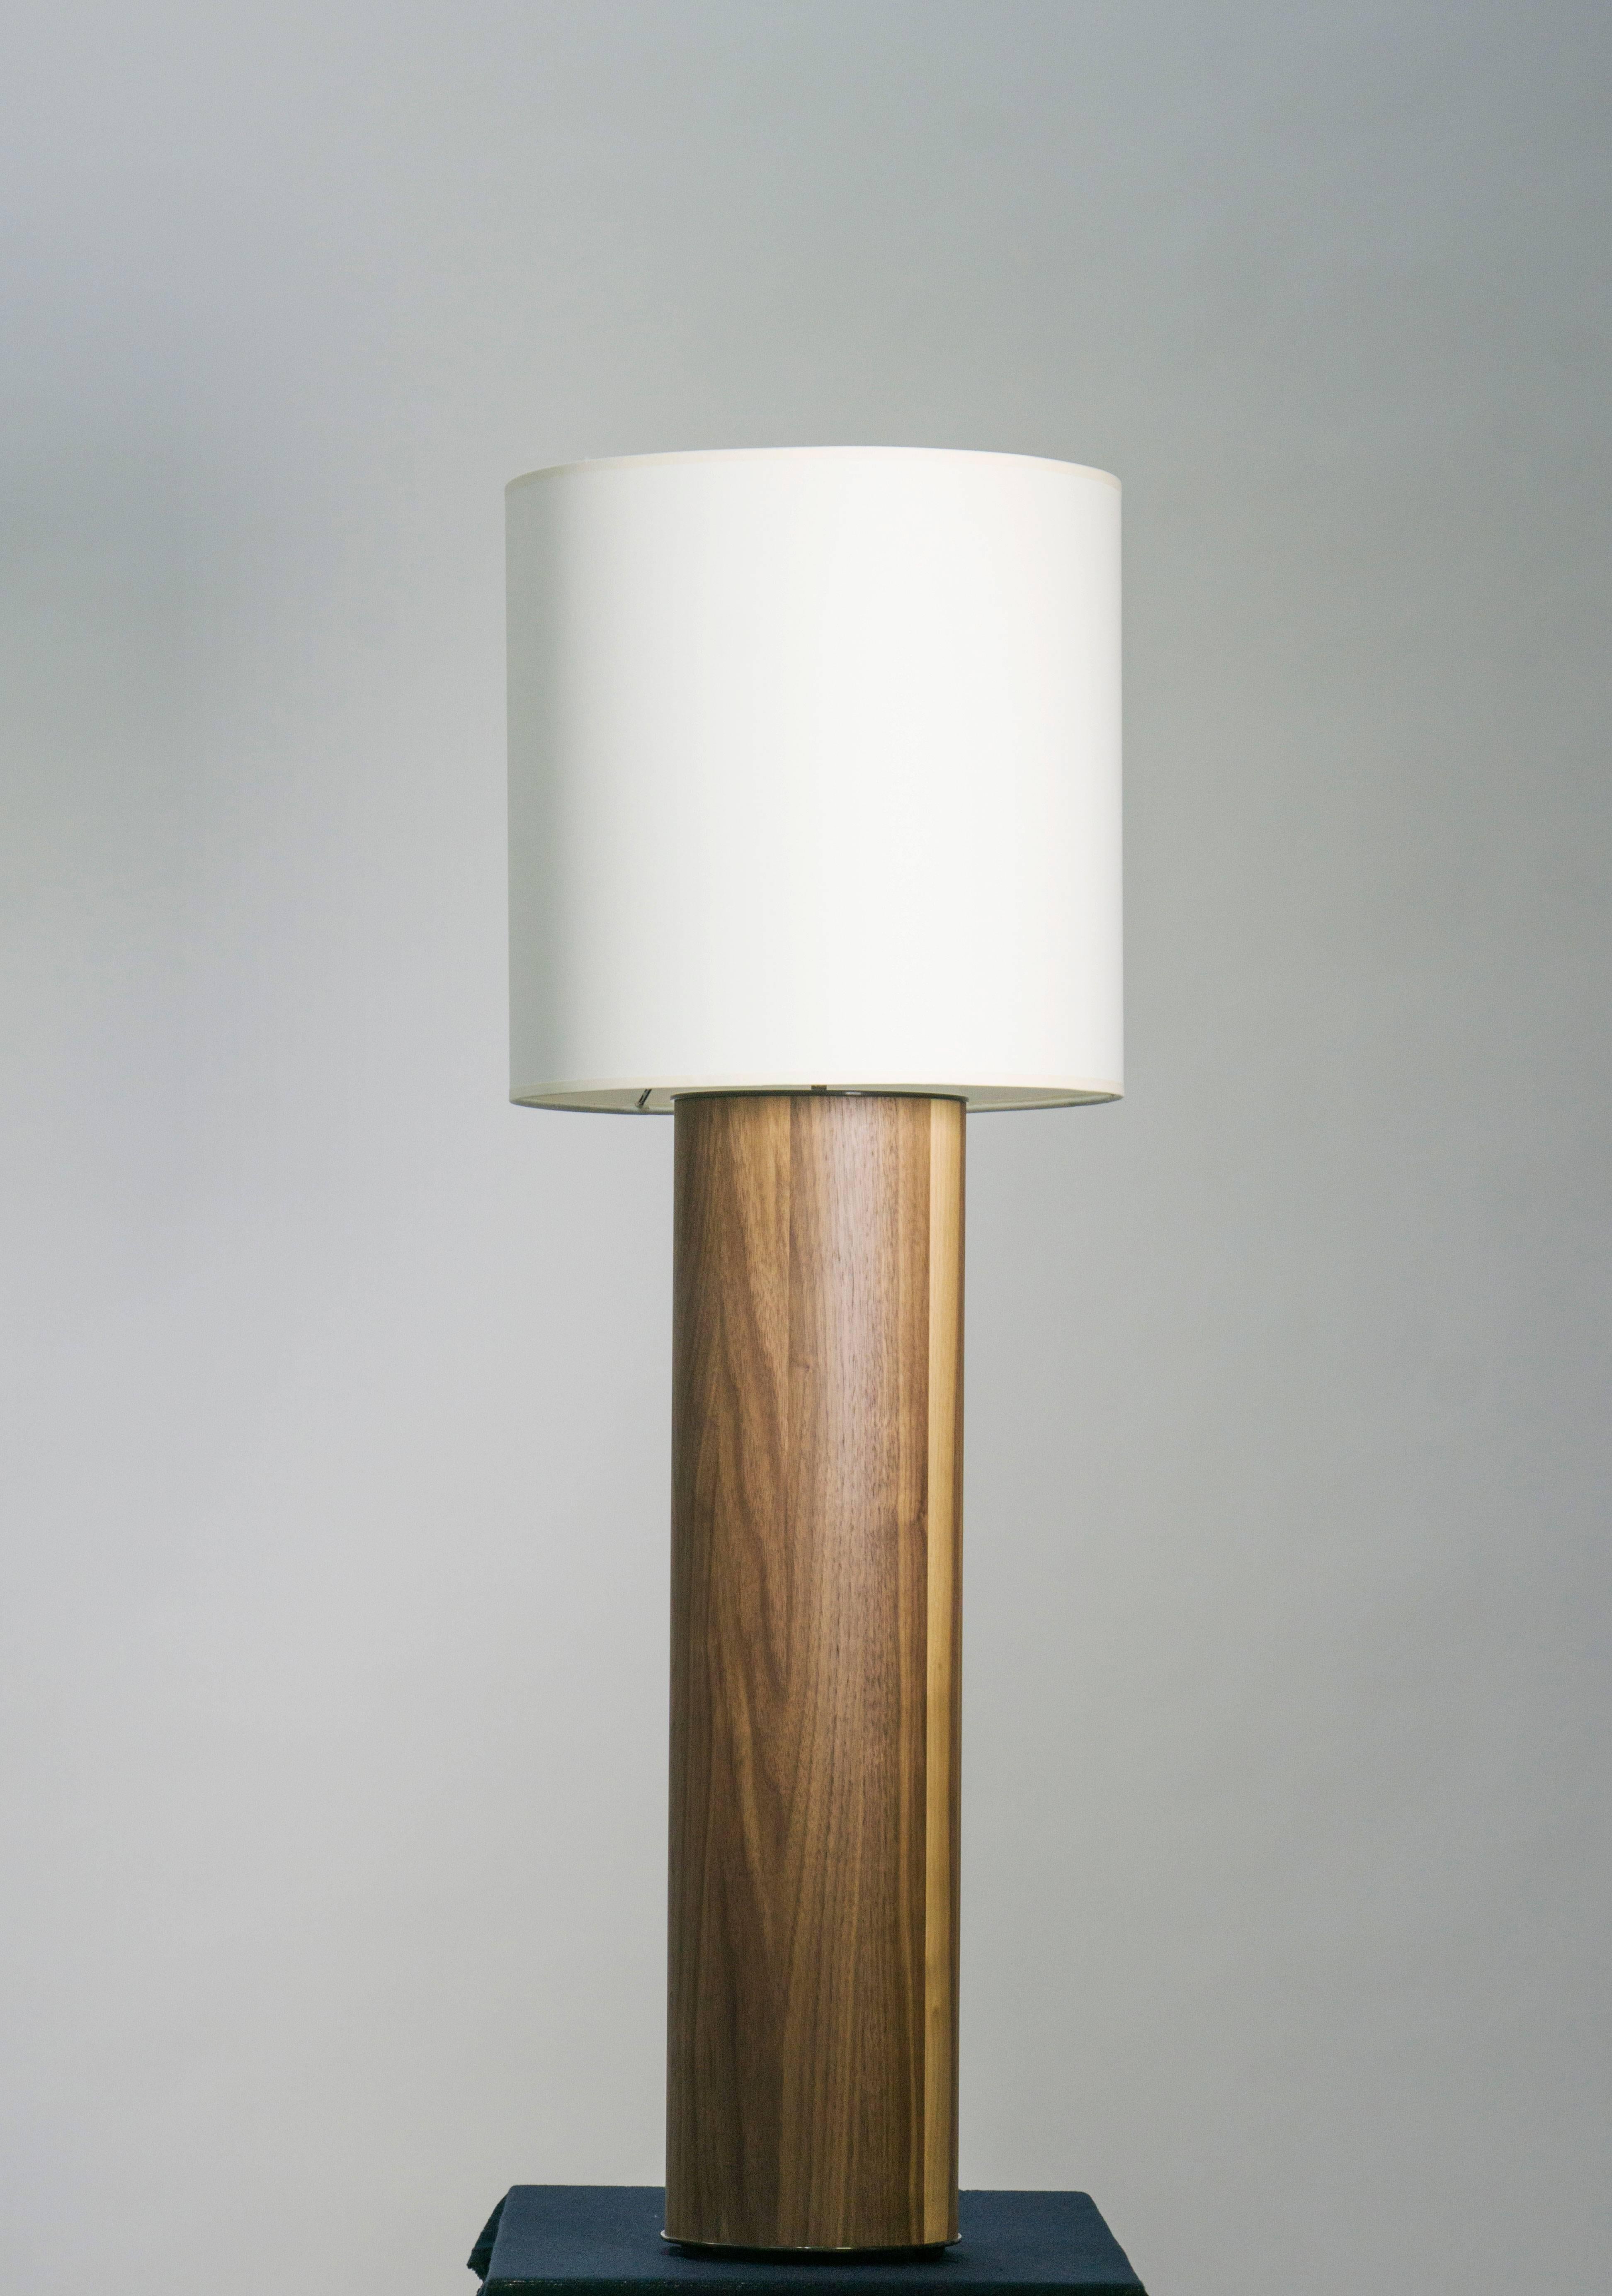 Table Lamp in Walnut by TInatin Kilaberize.

The geometric form emblematic of Tinatin Kilaberidze's work makes the lamp timeless, elegant. The American walnut is the designer's favourite wood for its beauty and warmth.

Dimensions of base: H